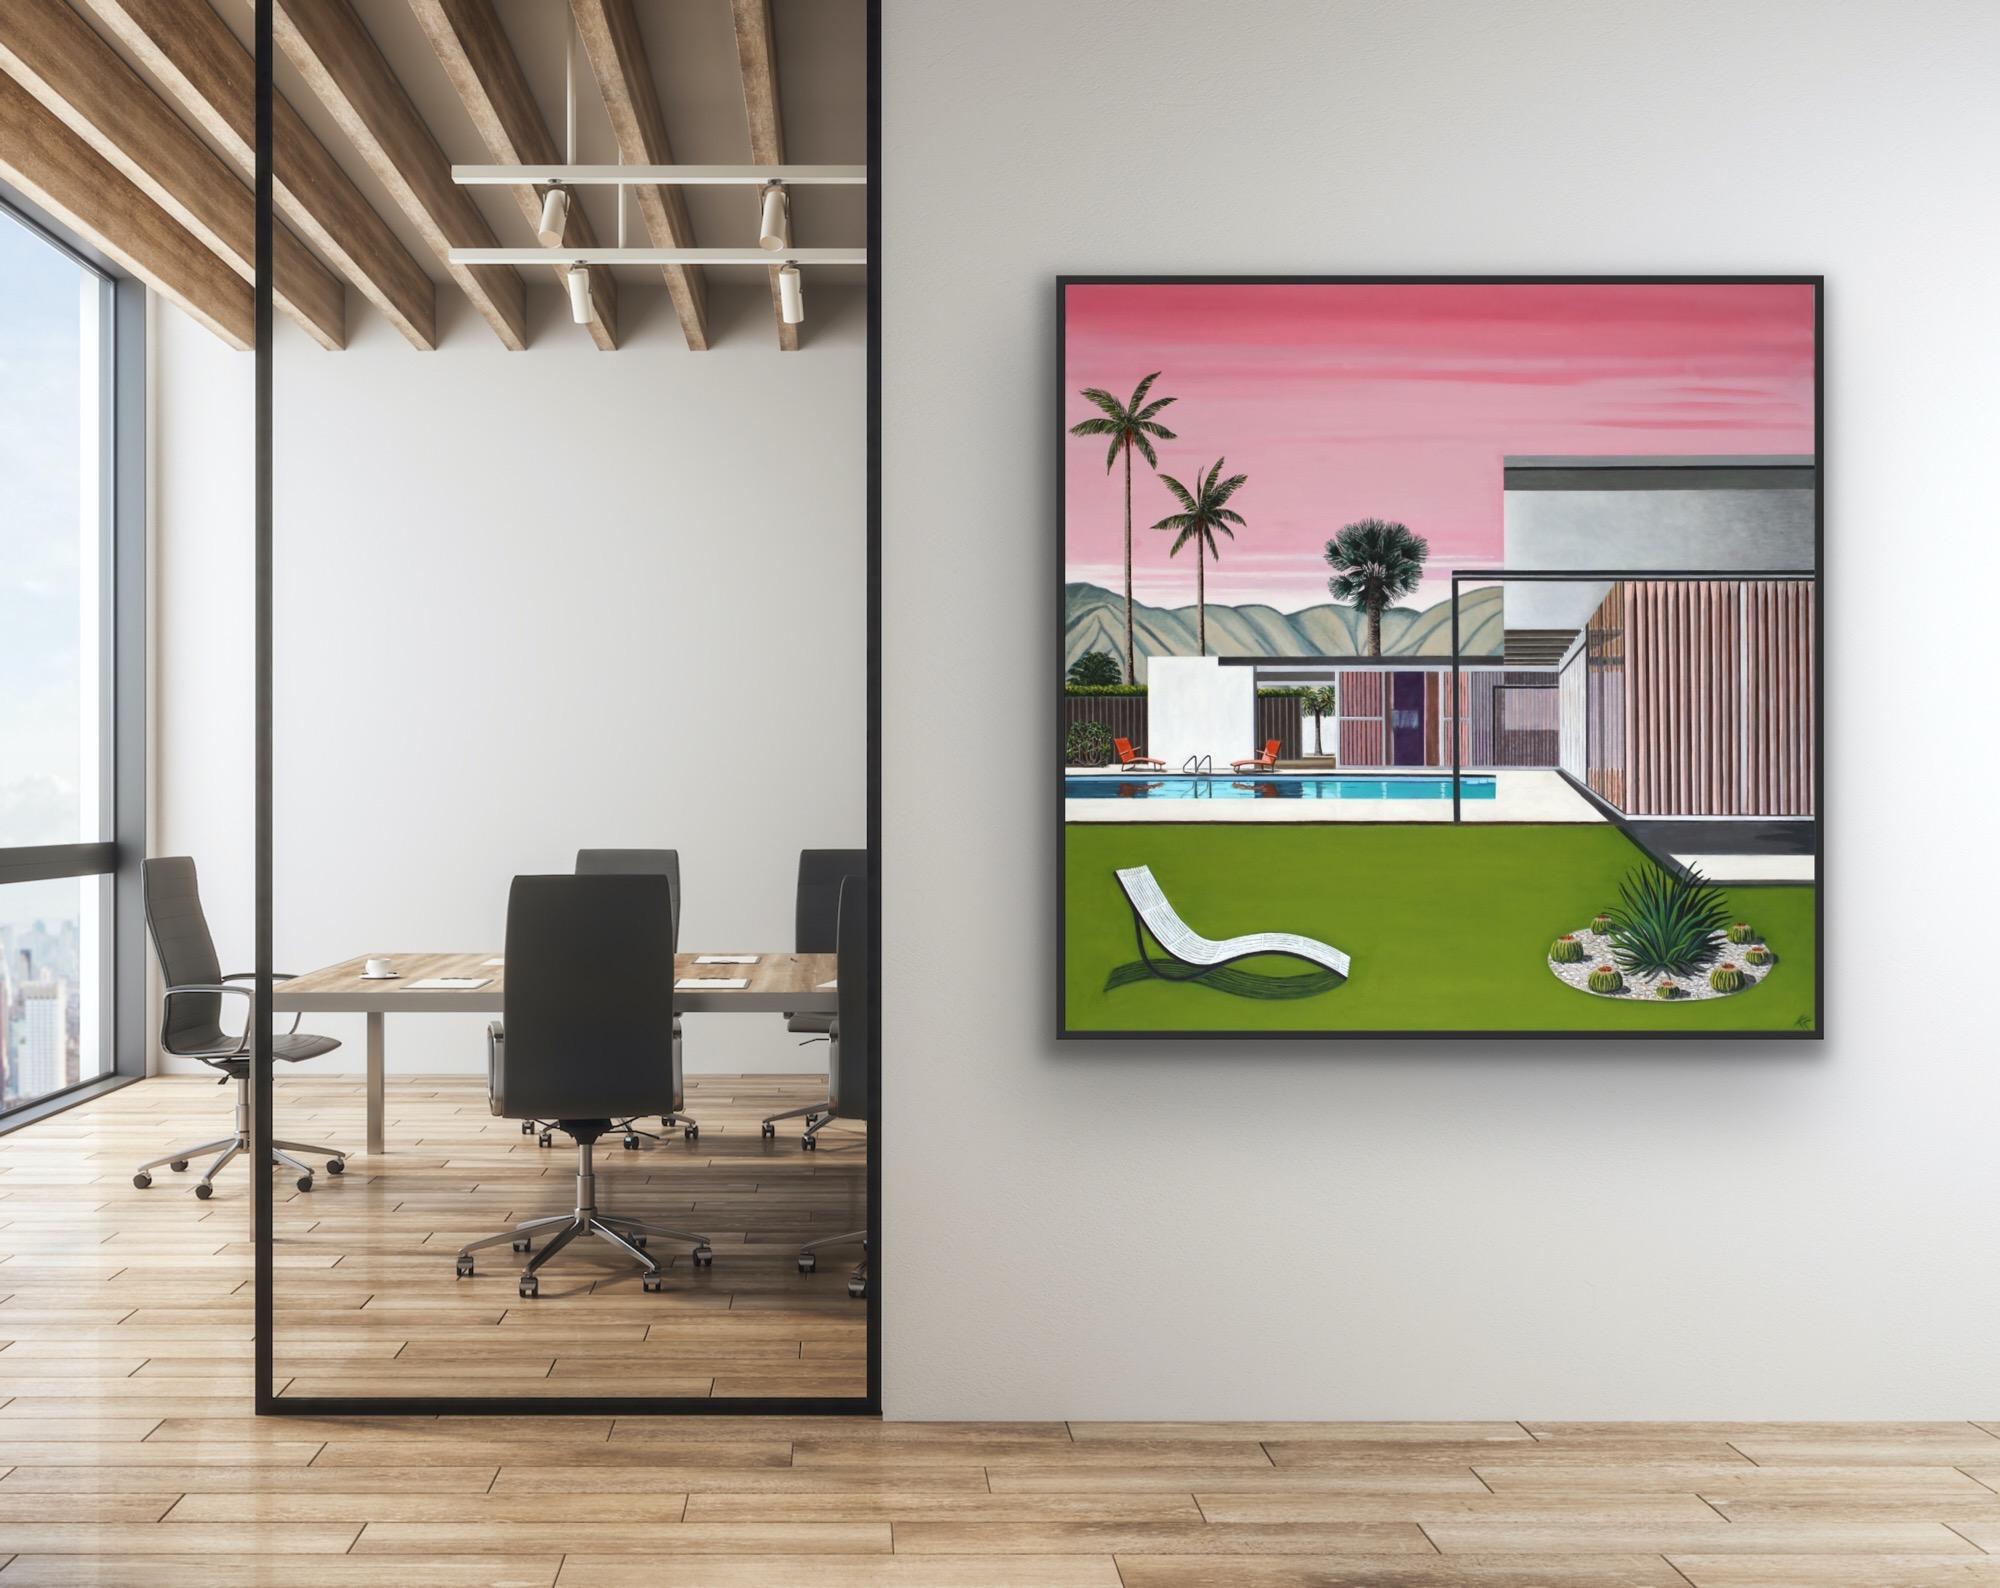 Pink Sky Neutra House, Original painting, Architect, Contemporary, Hockney style For Sale 6